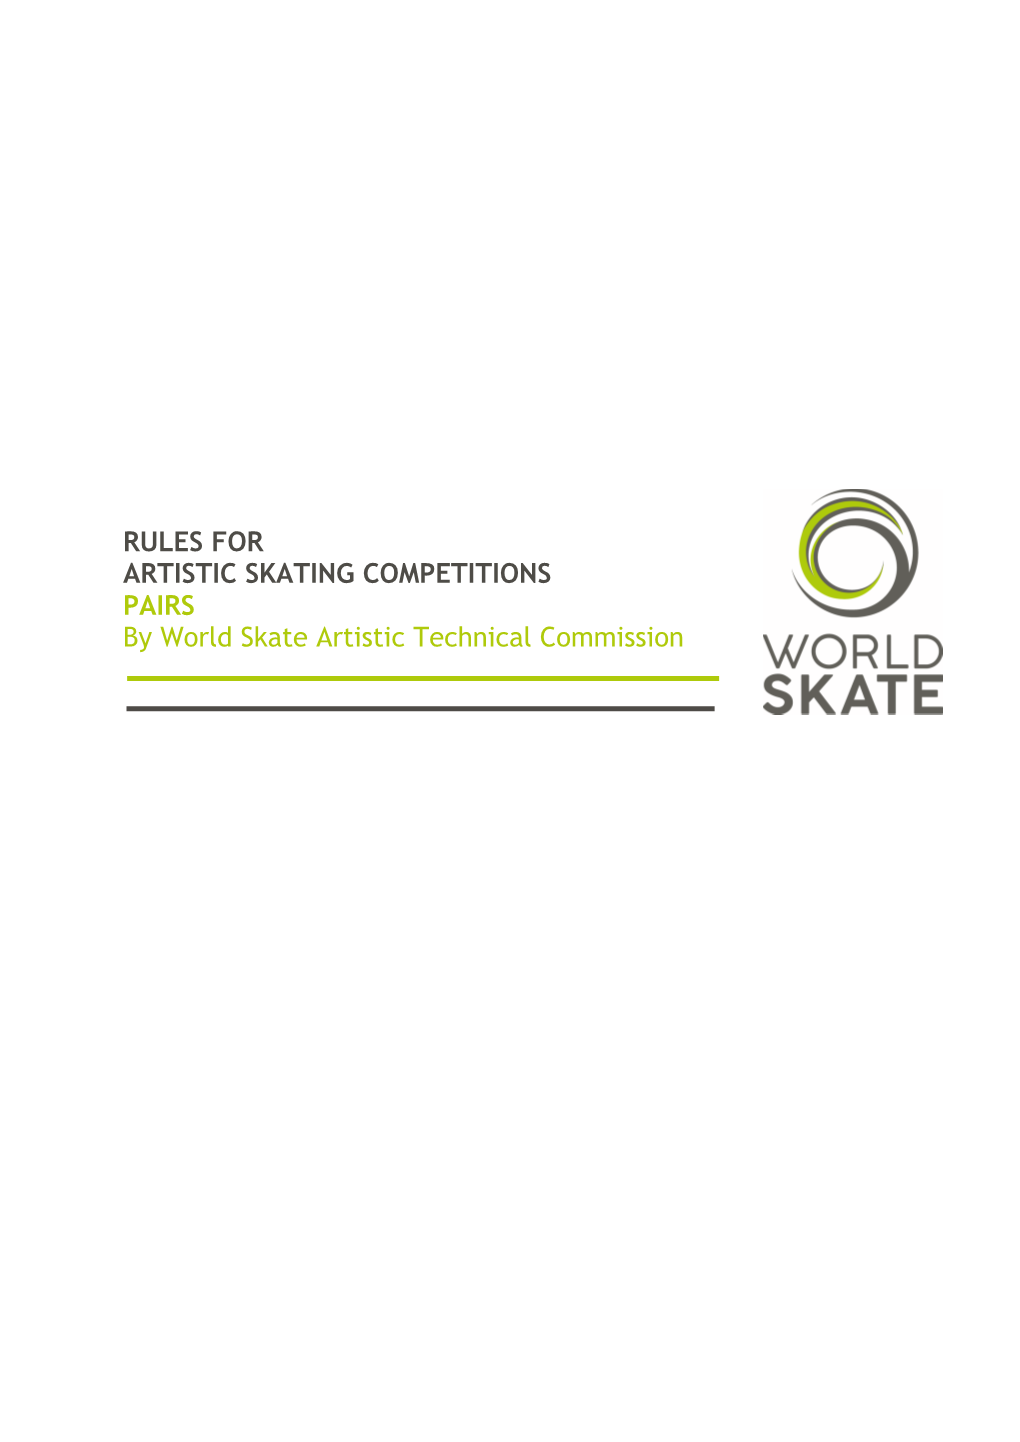 PAIRS by World Skate Artistic Technical Commission